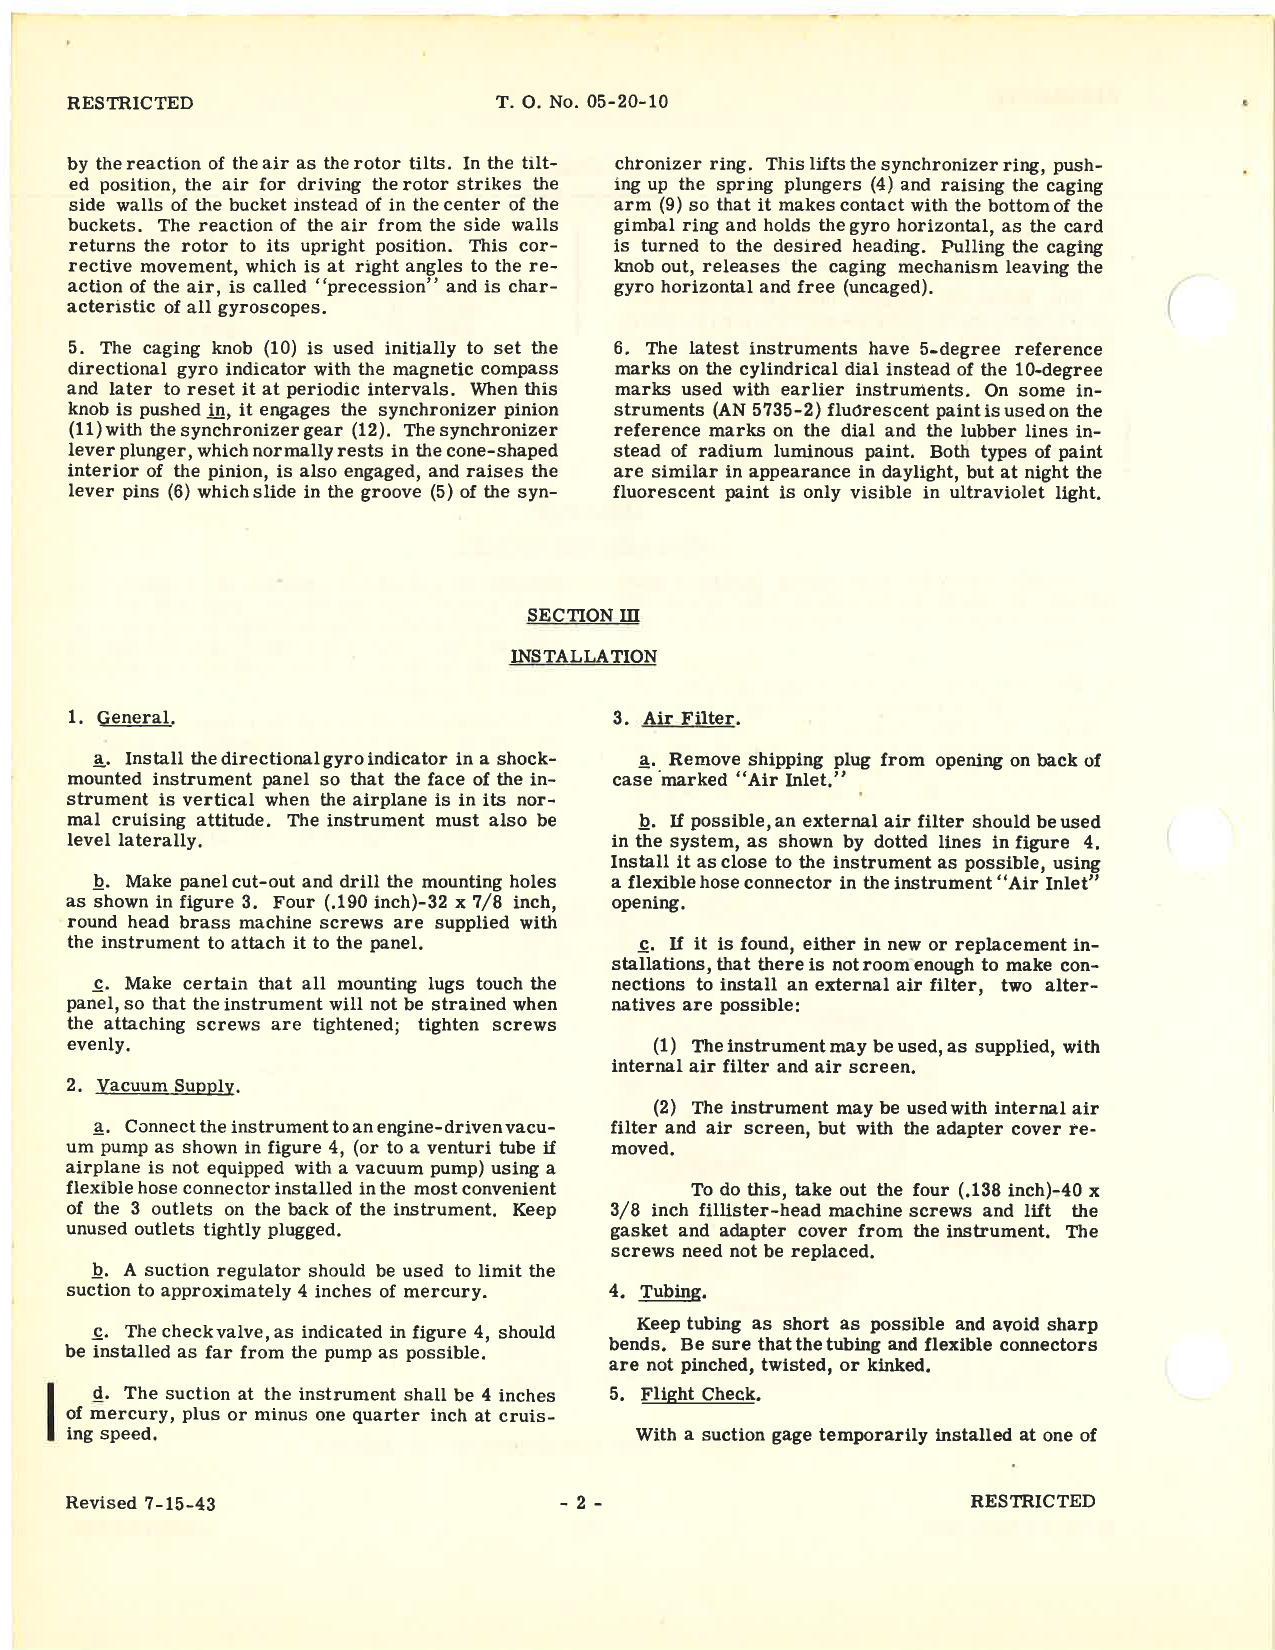 Sample page 8 from AirCorps Library document: Handbook of Instructions with Parts Catalog for Directional Gyro Indicators